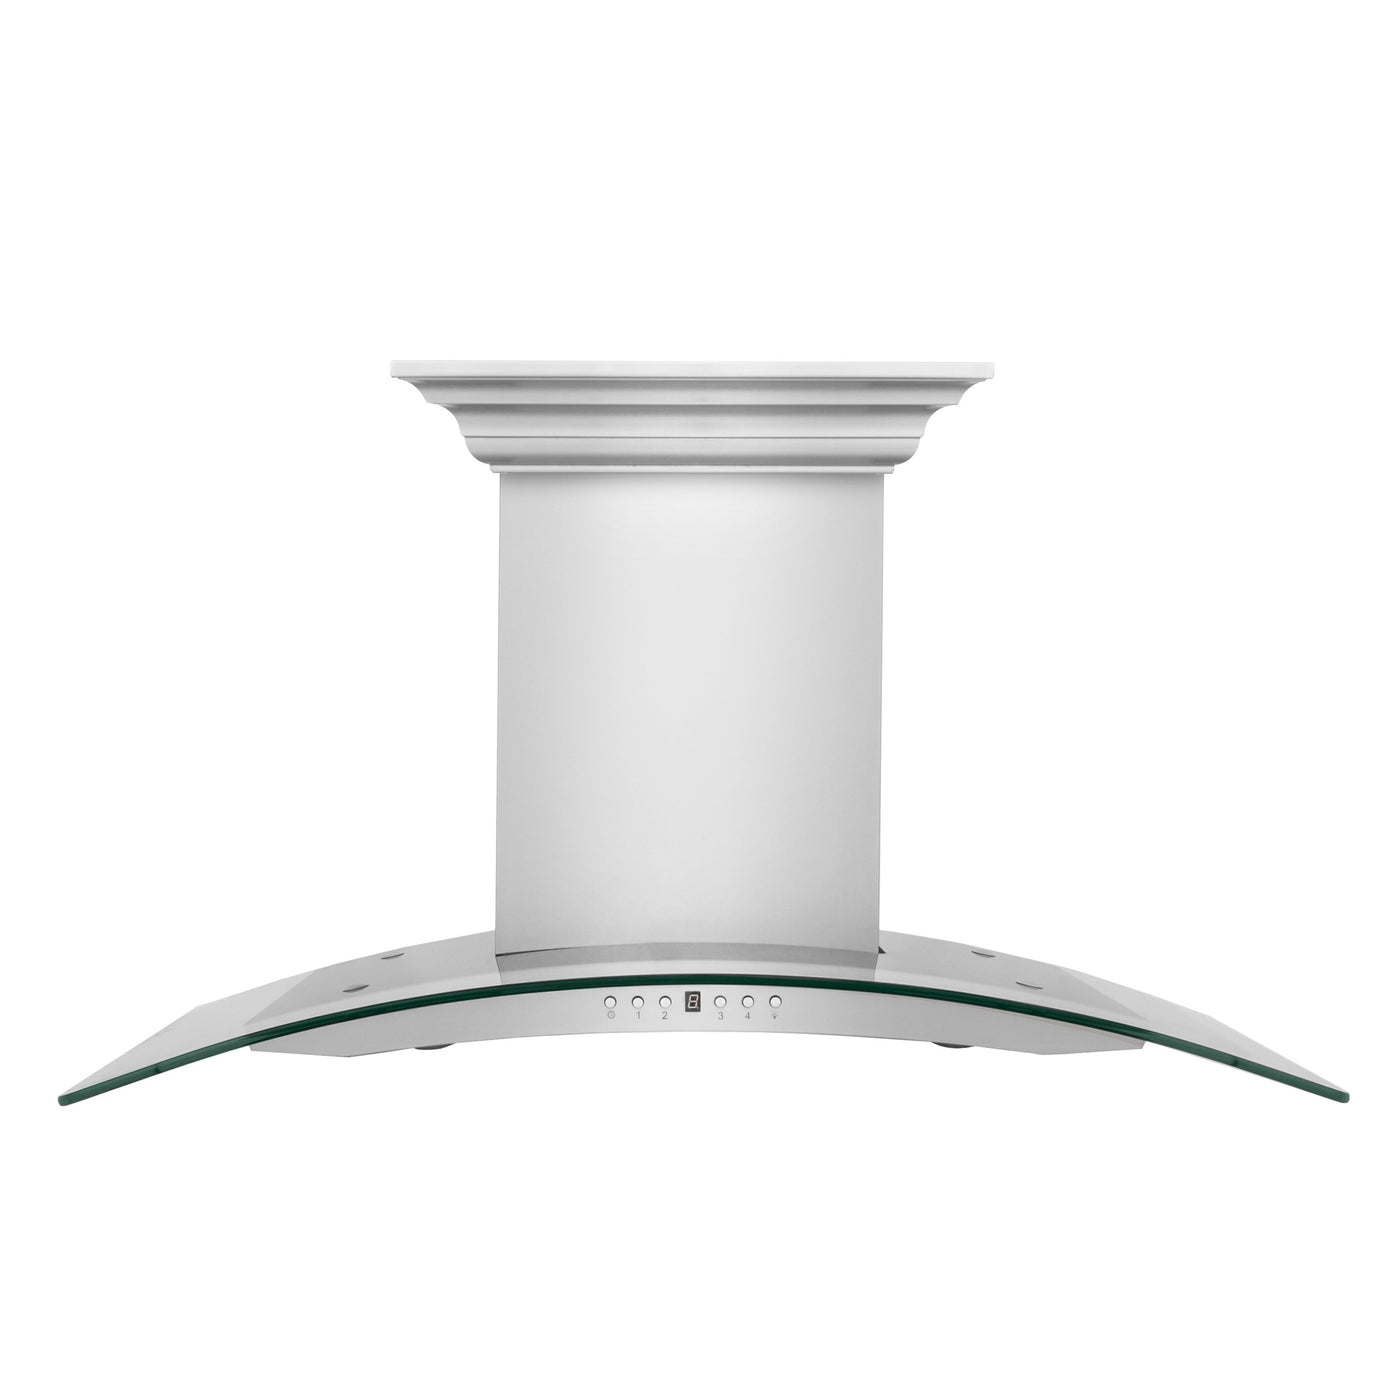 ZLINE Wall Mount Range Hood in Stainless Steel with Built-in CrownSound™ Bluetooth Speakers (KN4CRN-BT)